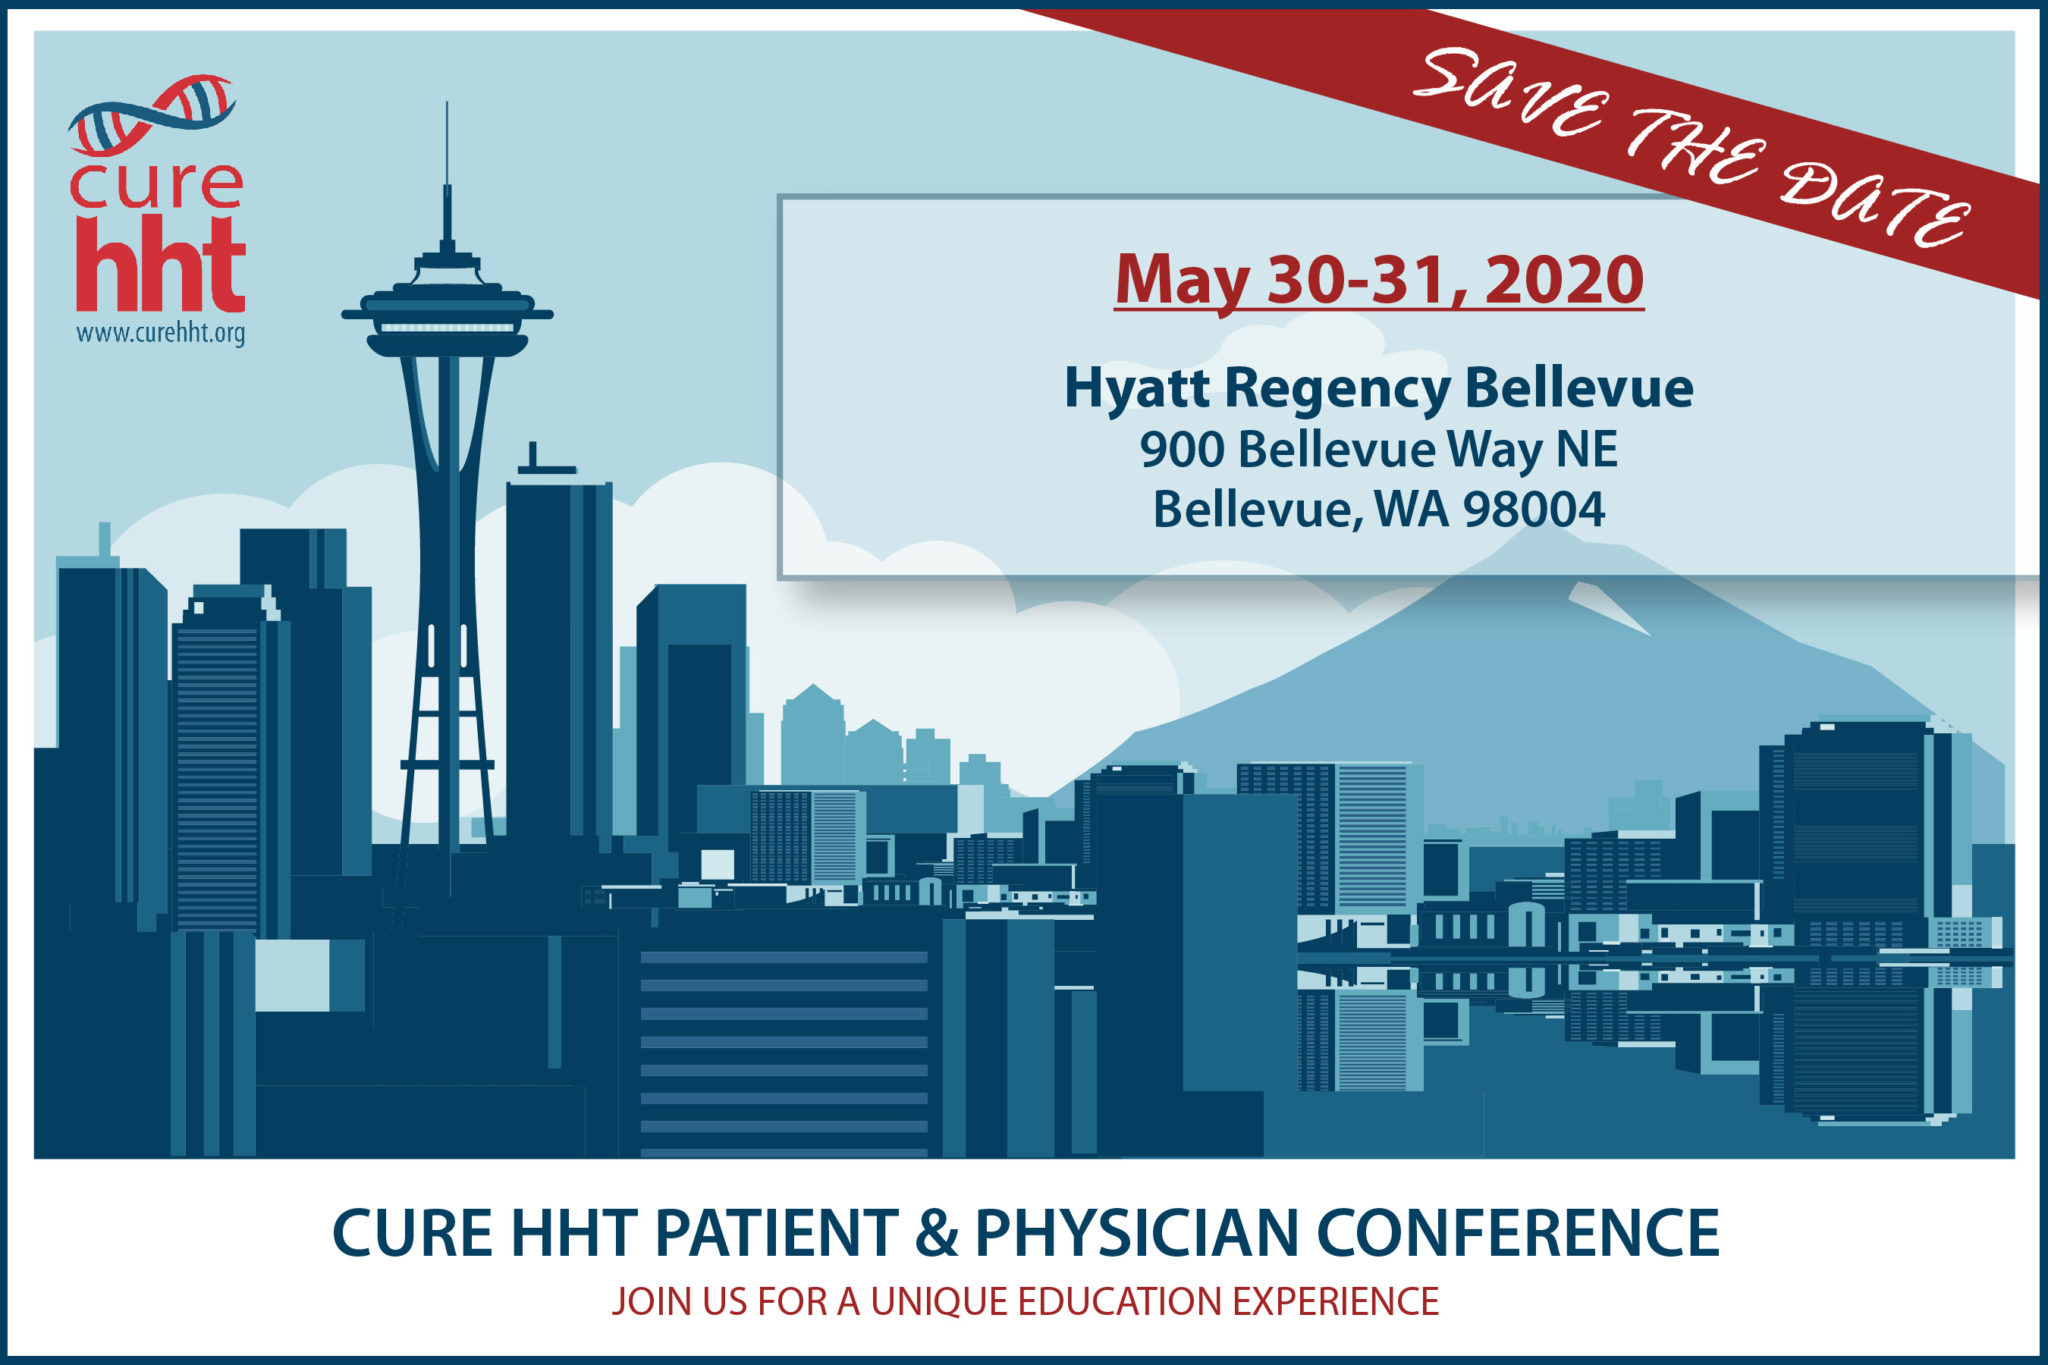 Patient & Physician Conference Washington 2020 CureHHT